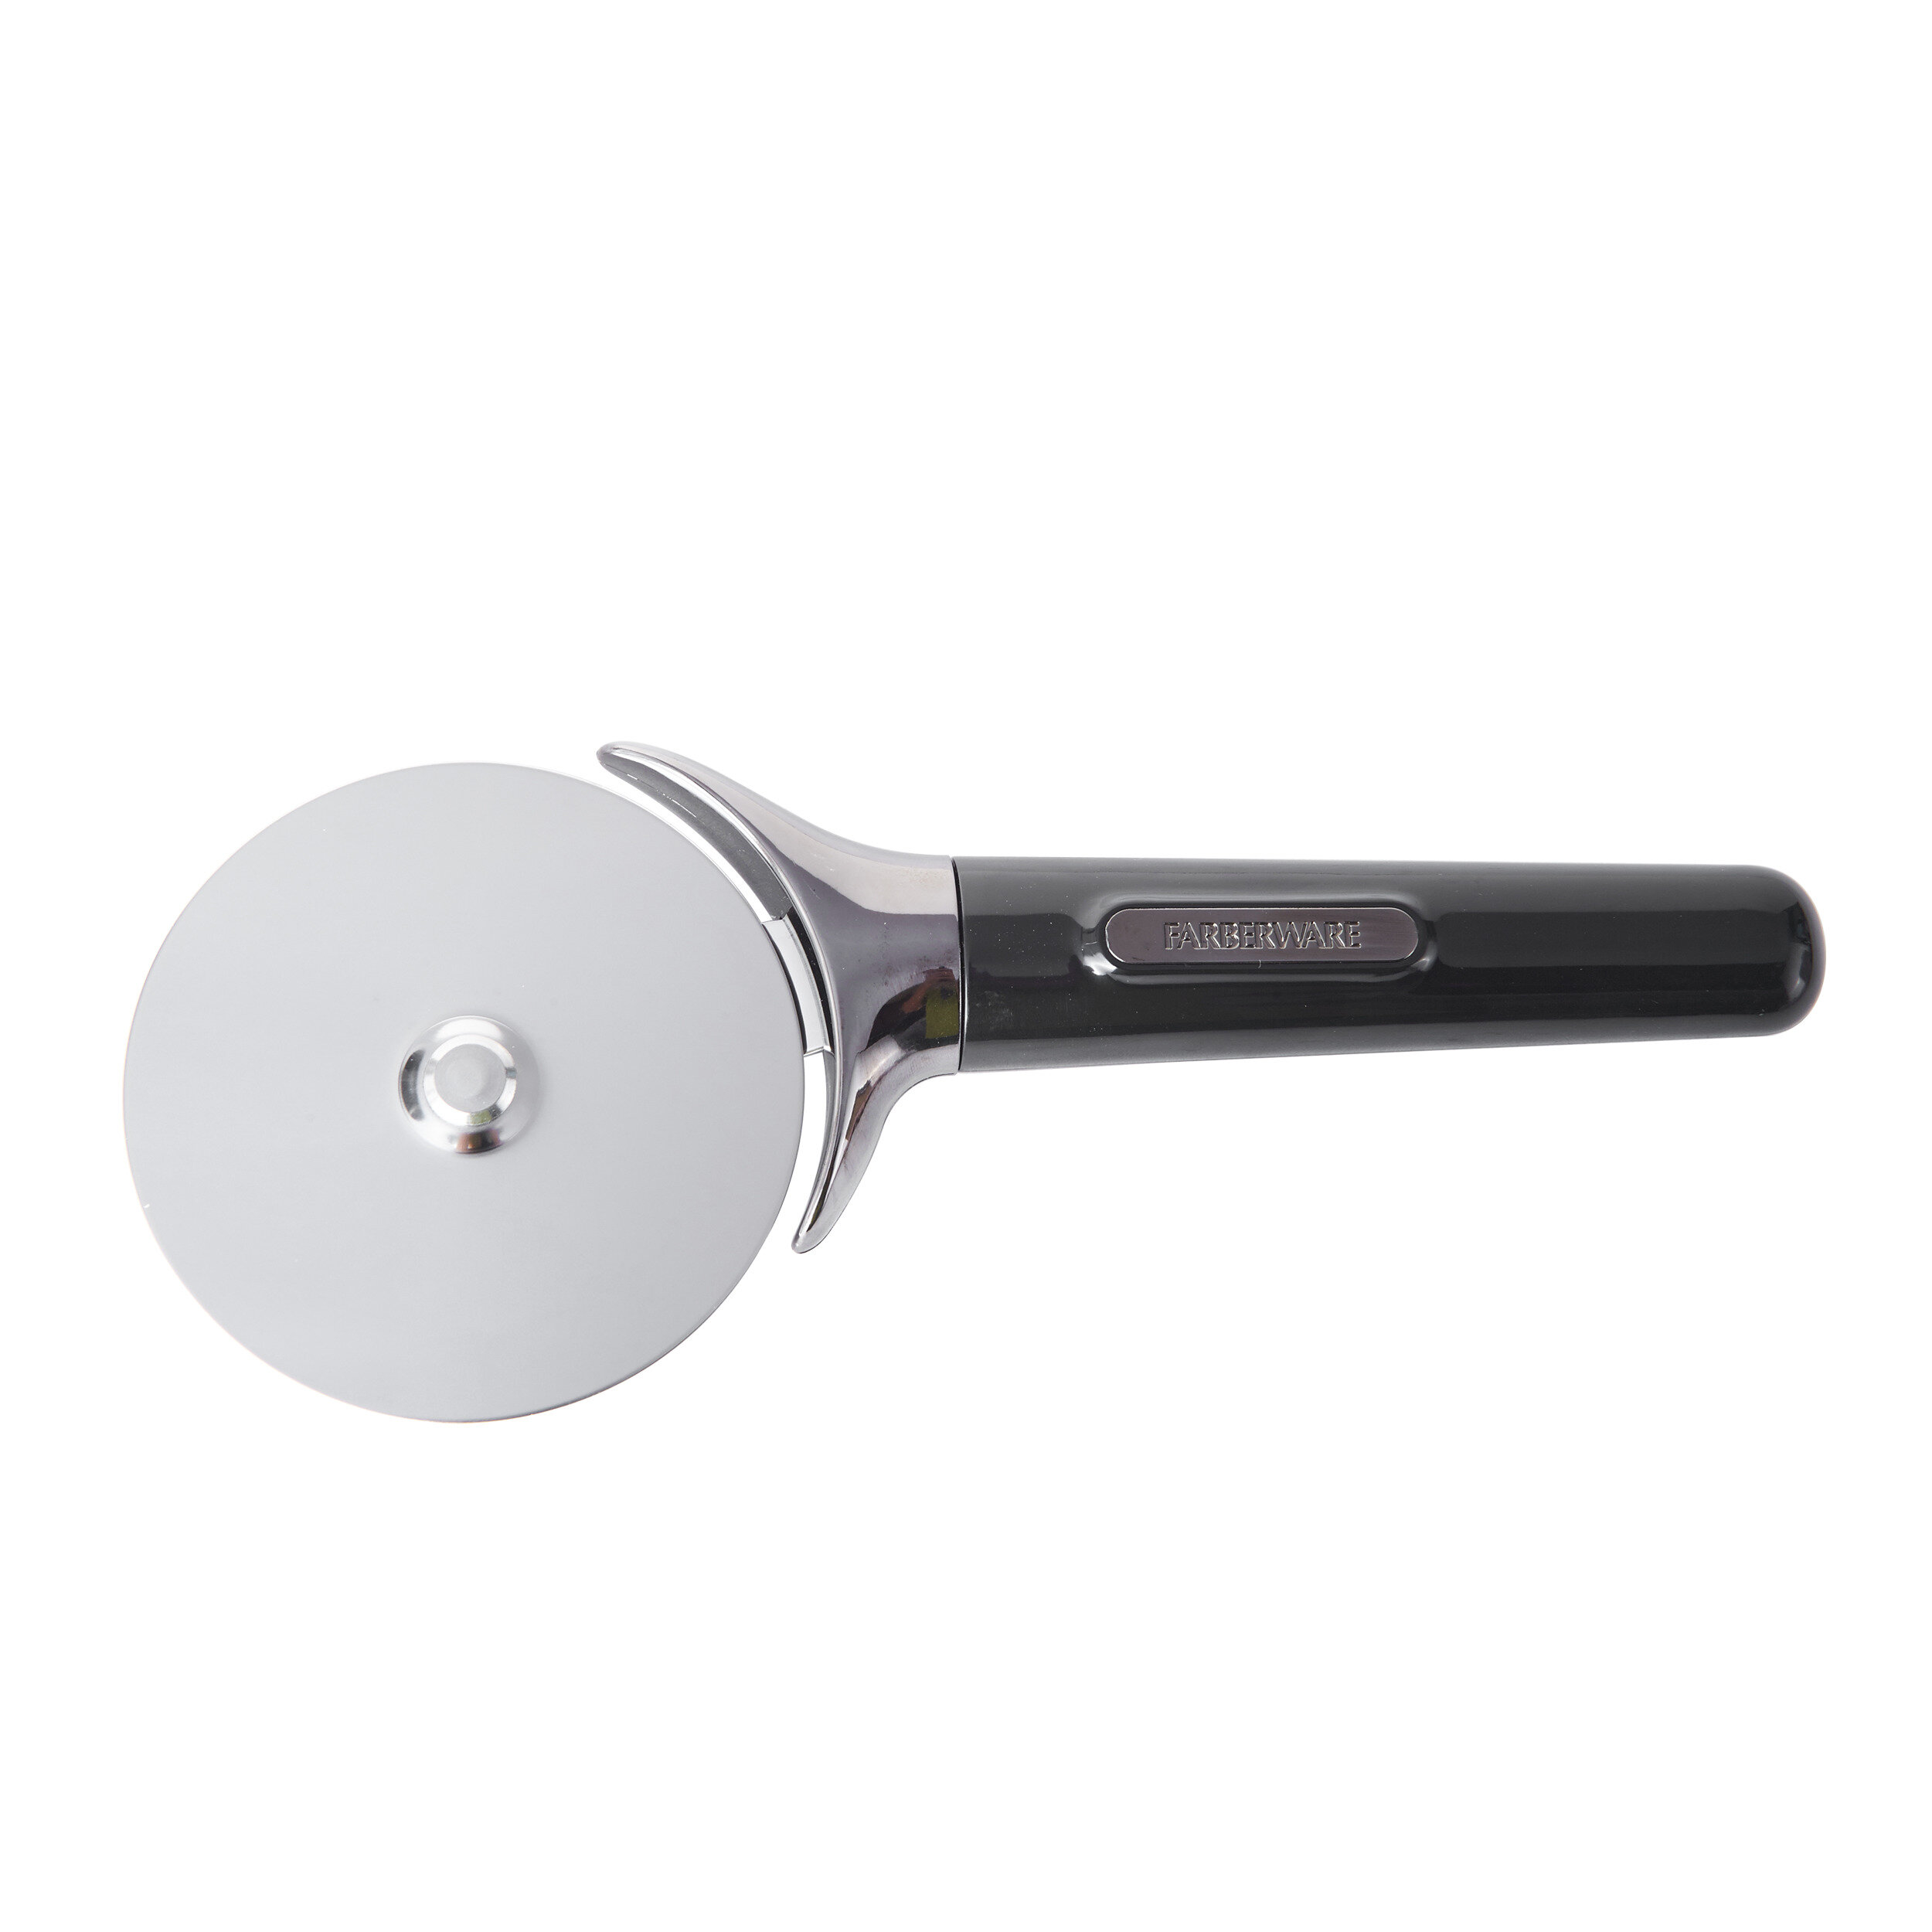 Farberware Professional Stainless Steel Pizza Cutter, 9.37-Inch, Black &  Reviews